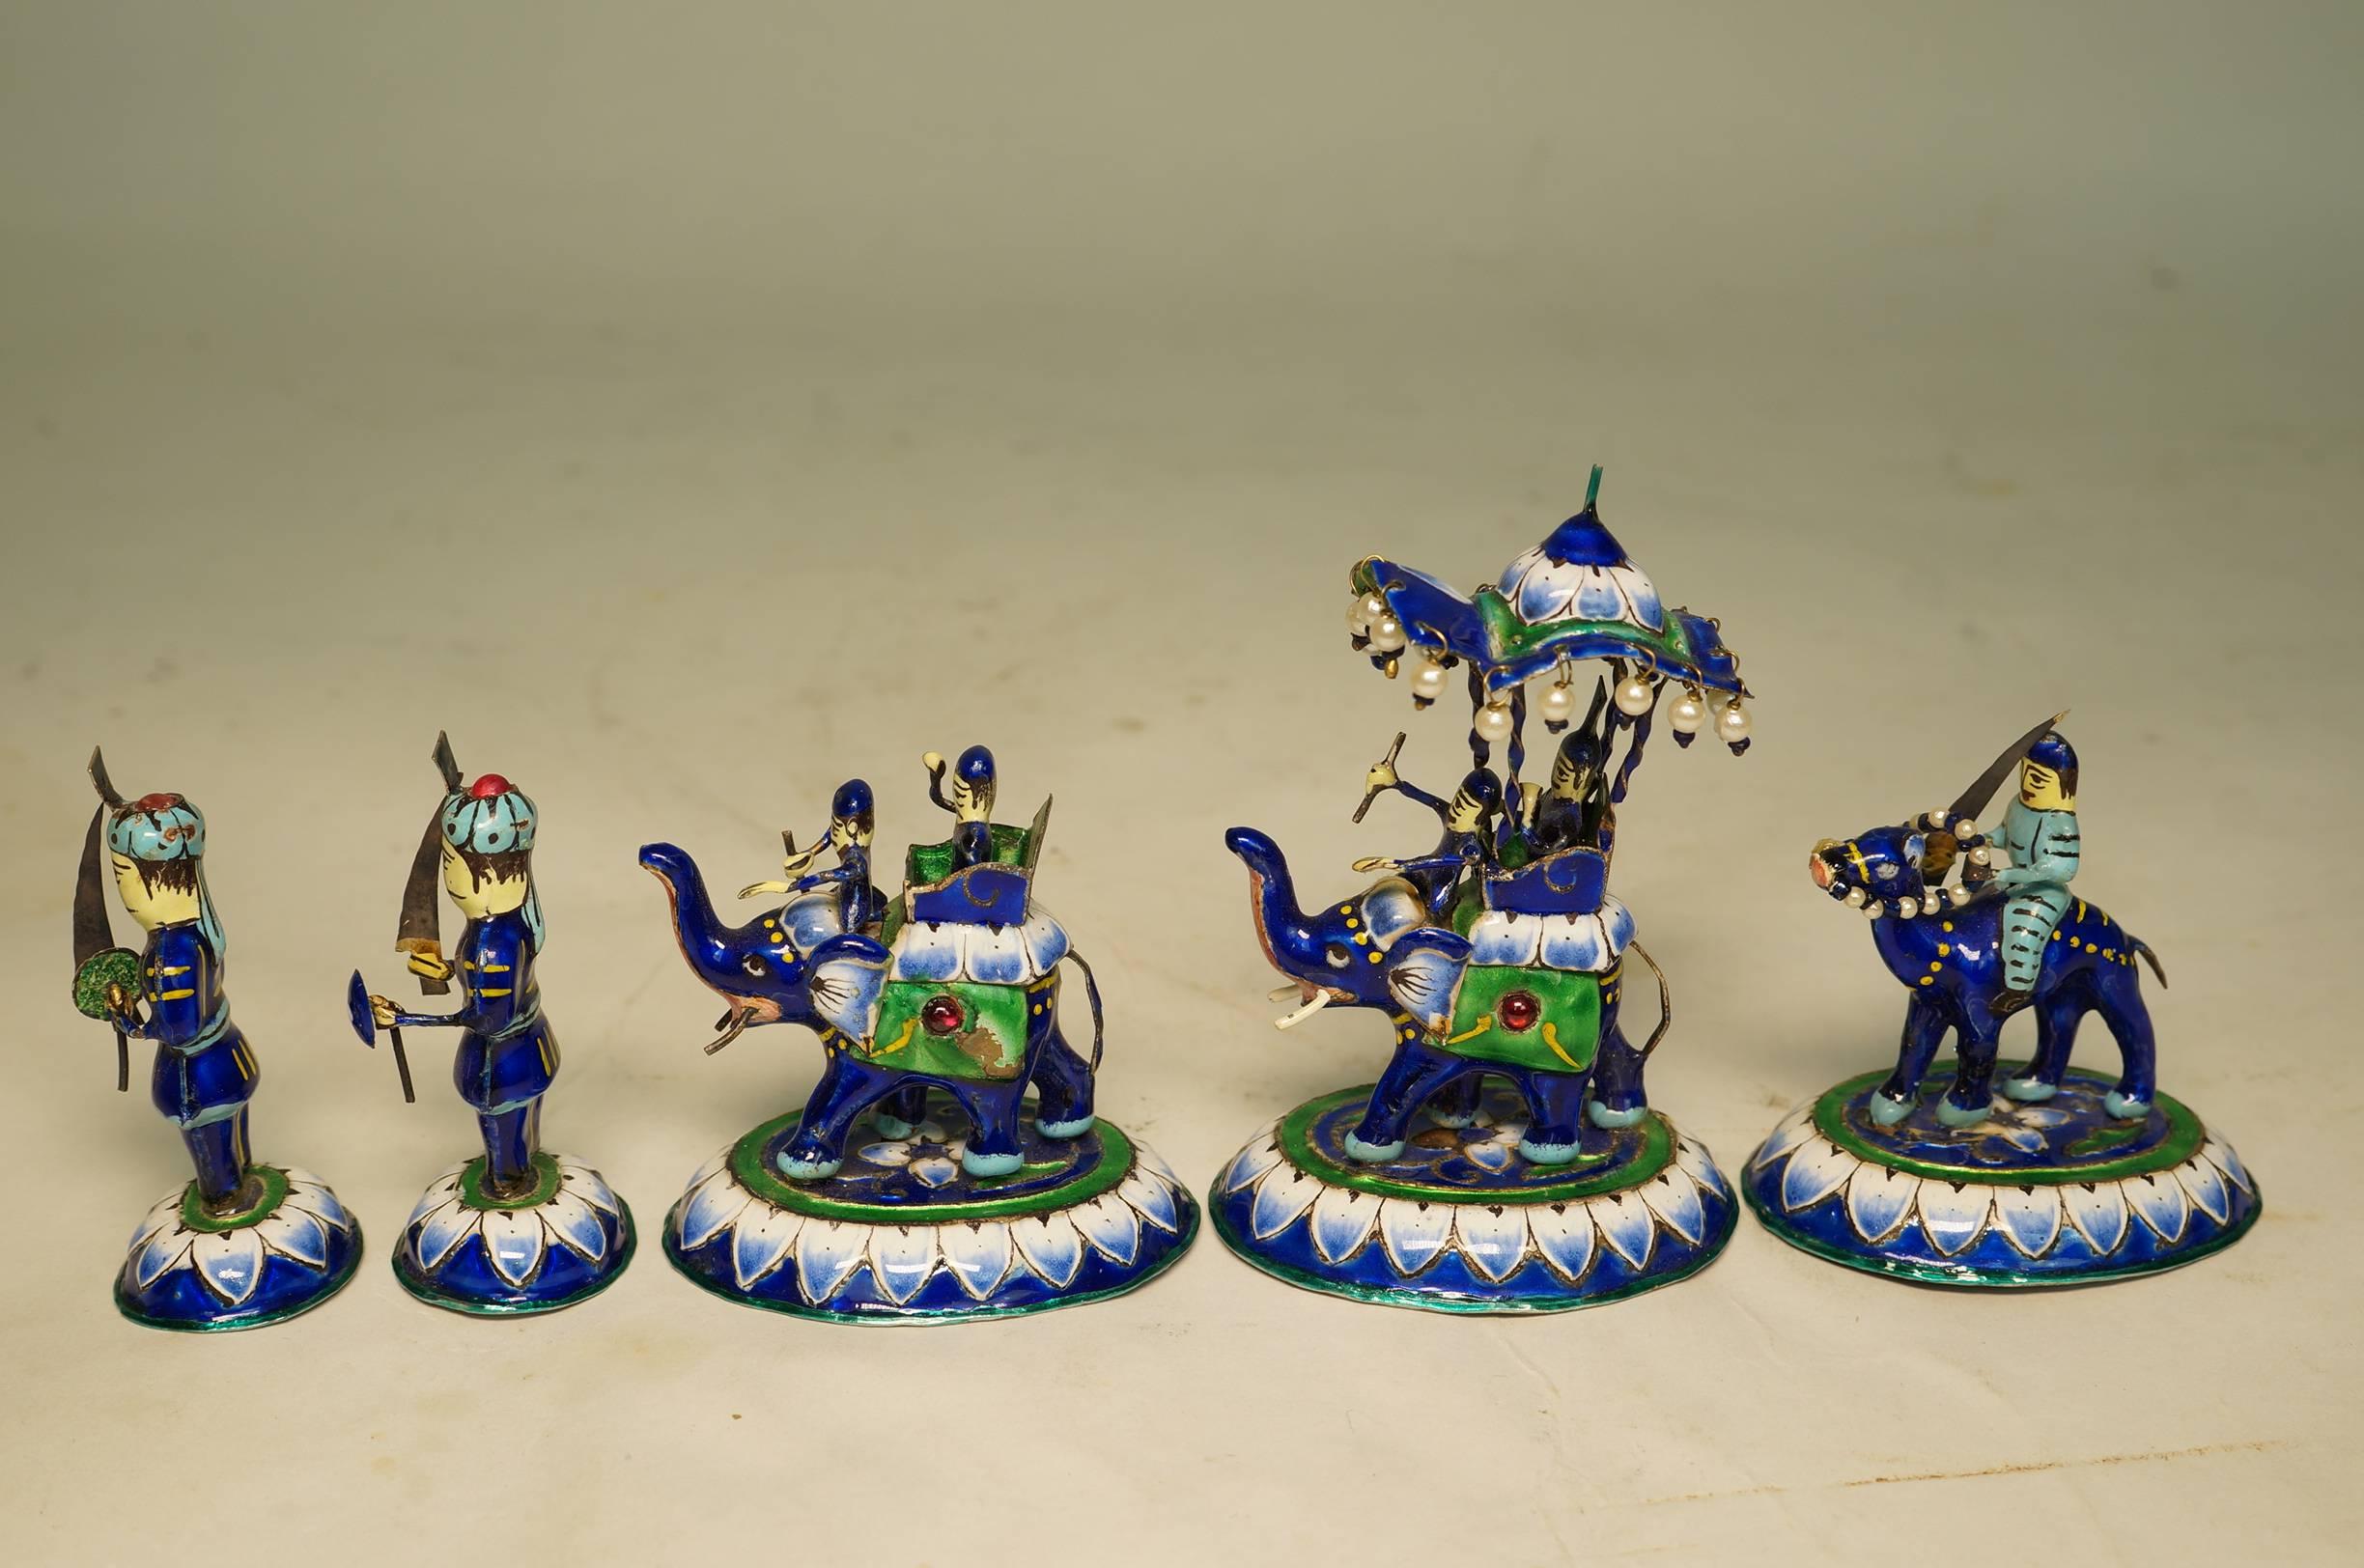 Fine and Complete Blue and Green Enamel Chess Set in Original Box 3